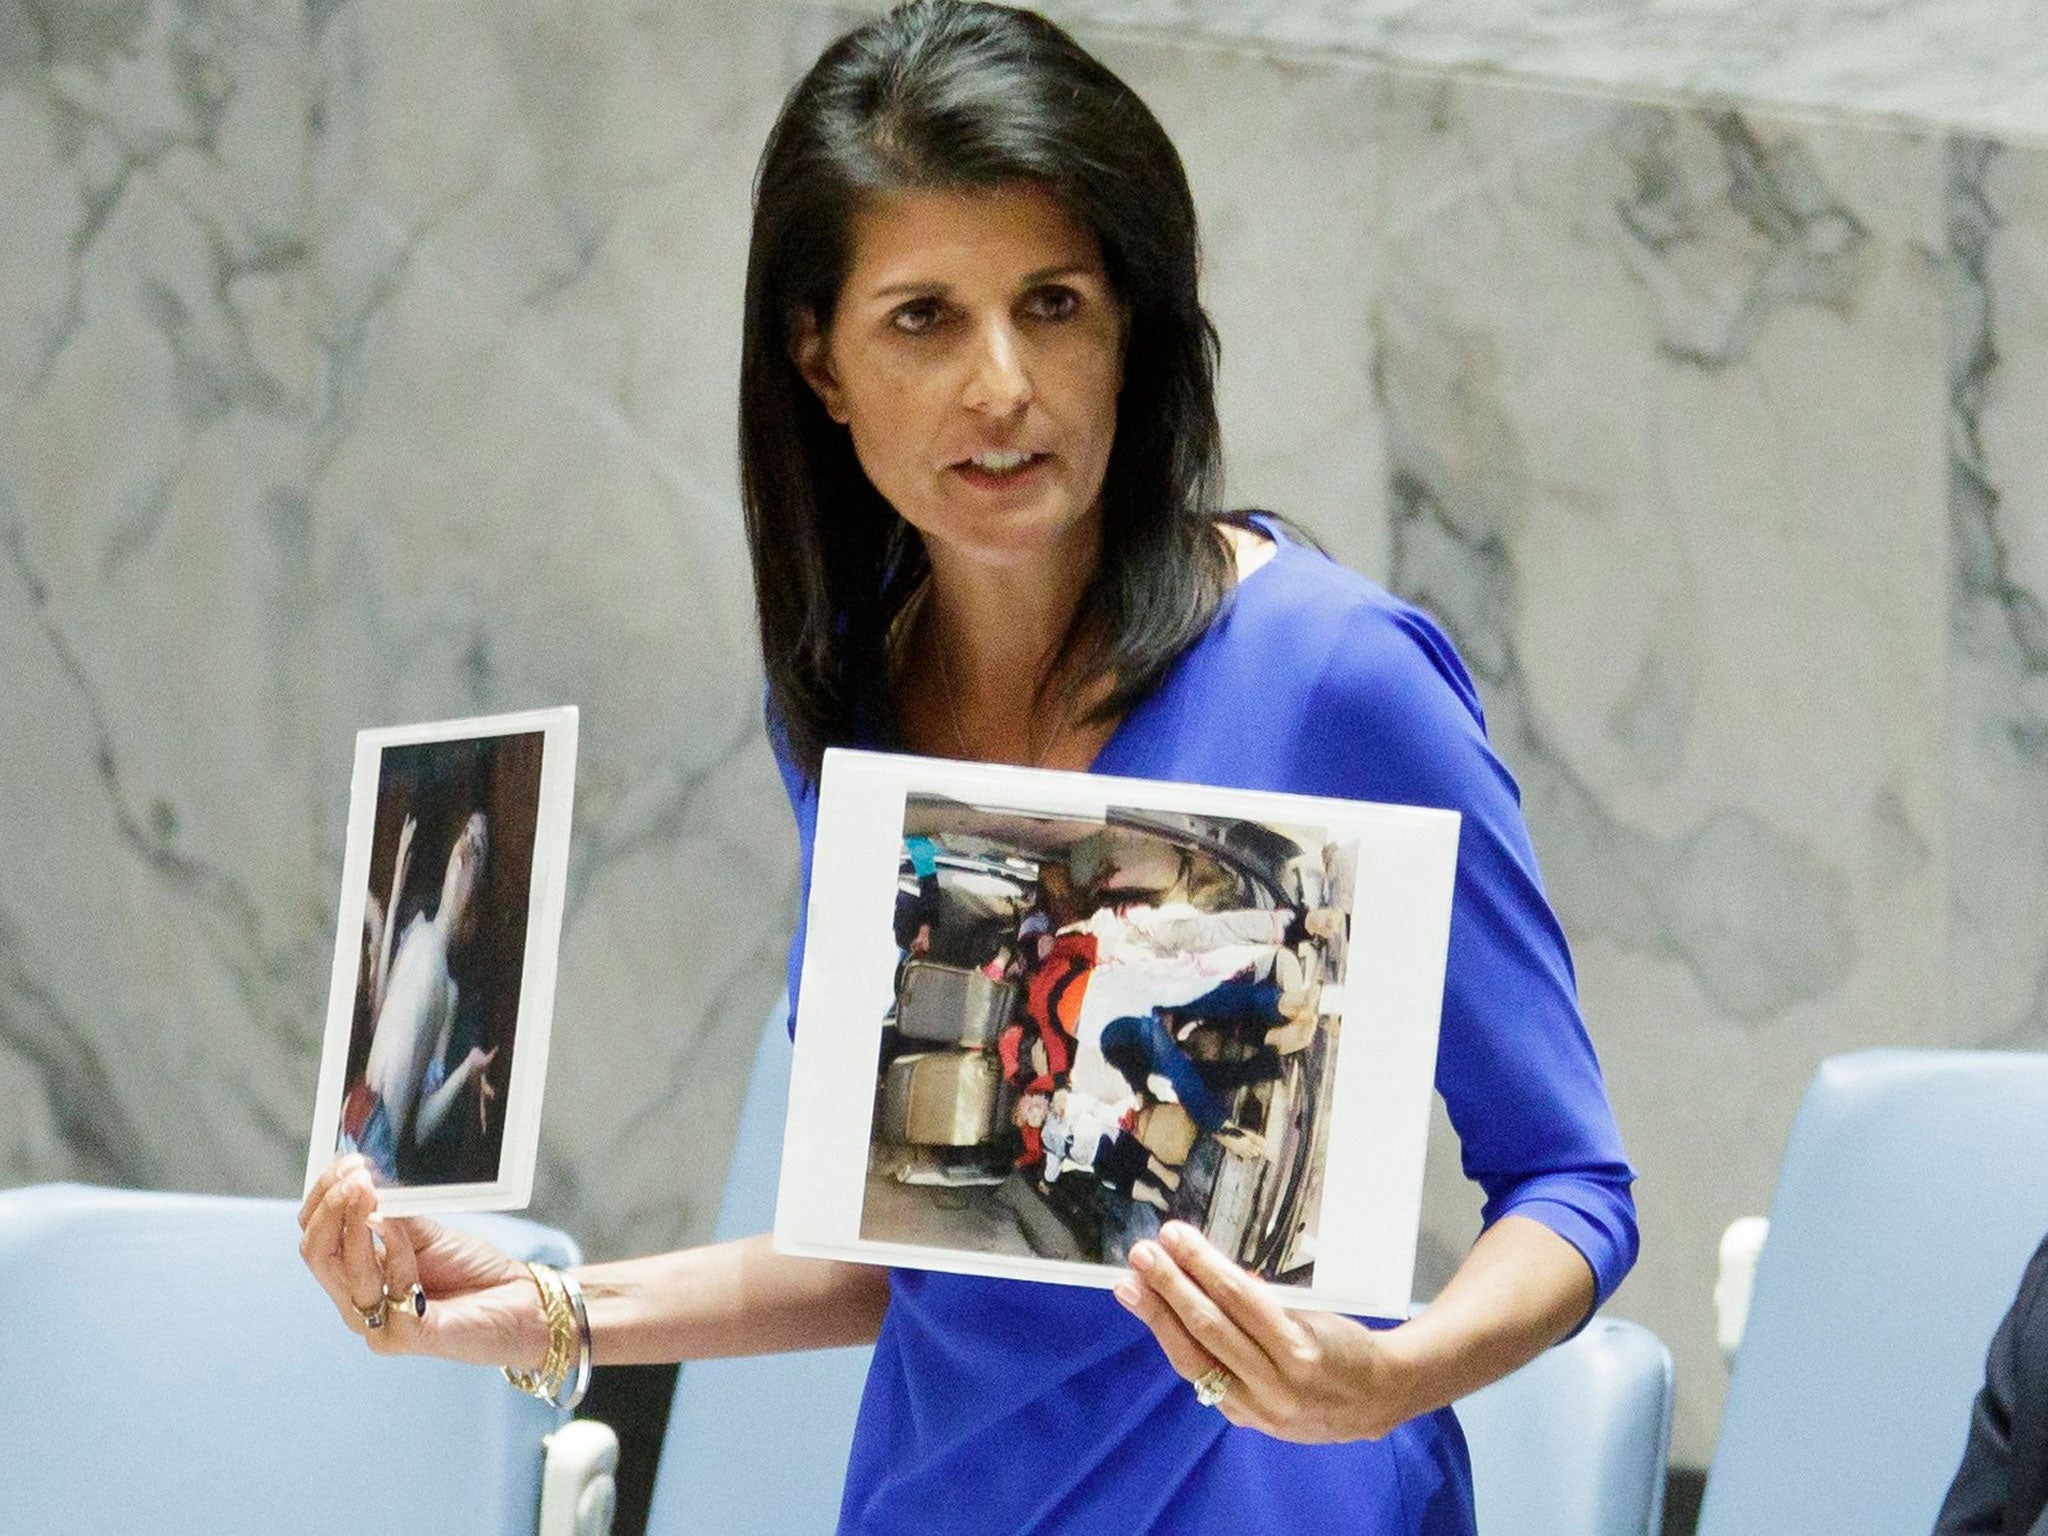 Nikki Haley, the United States' Ambassador to the United Nations, holds up images of victims of a chemical attack in Syria